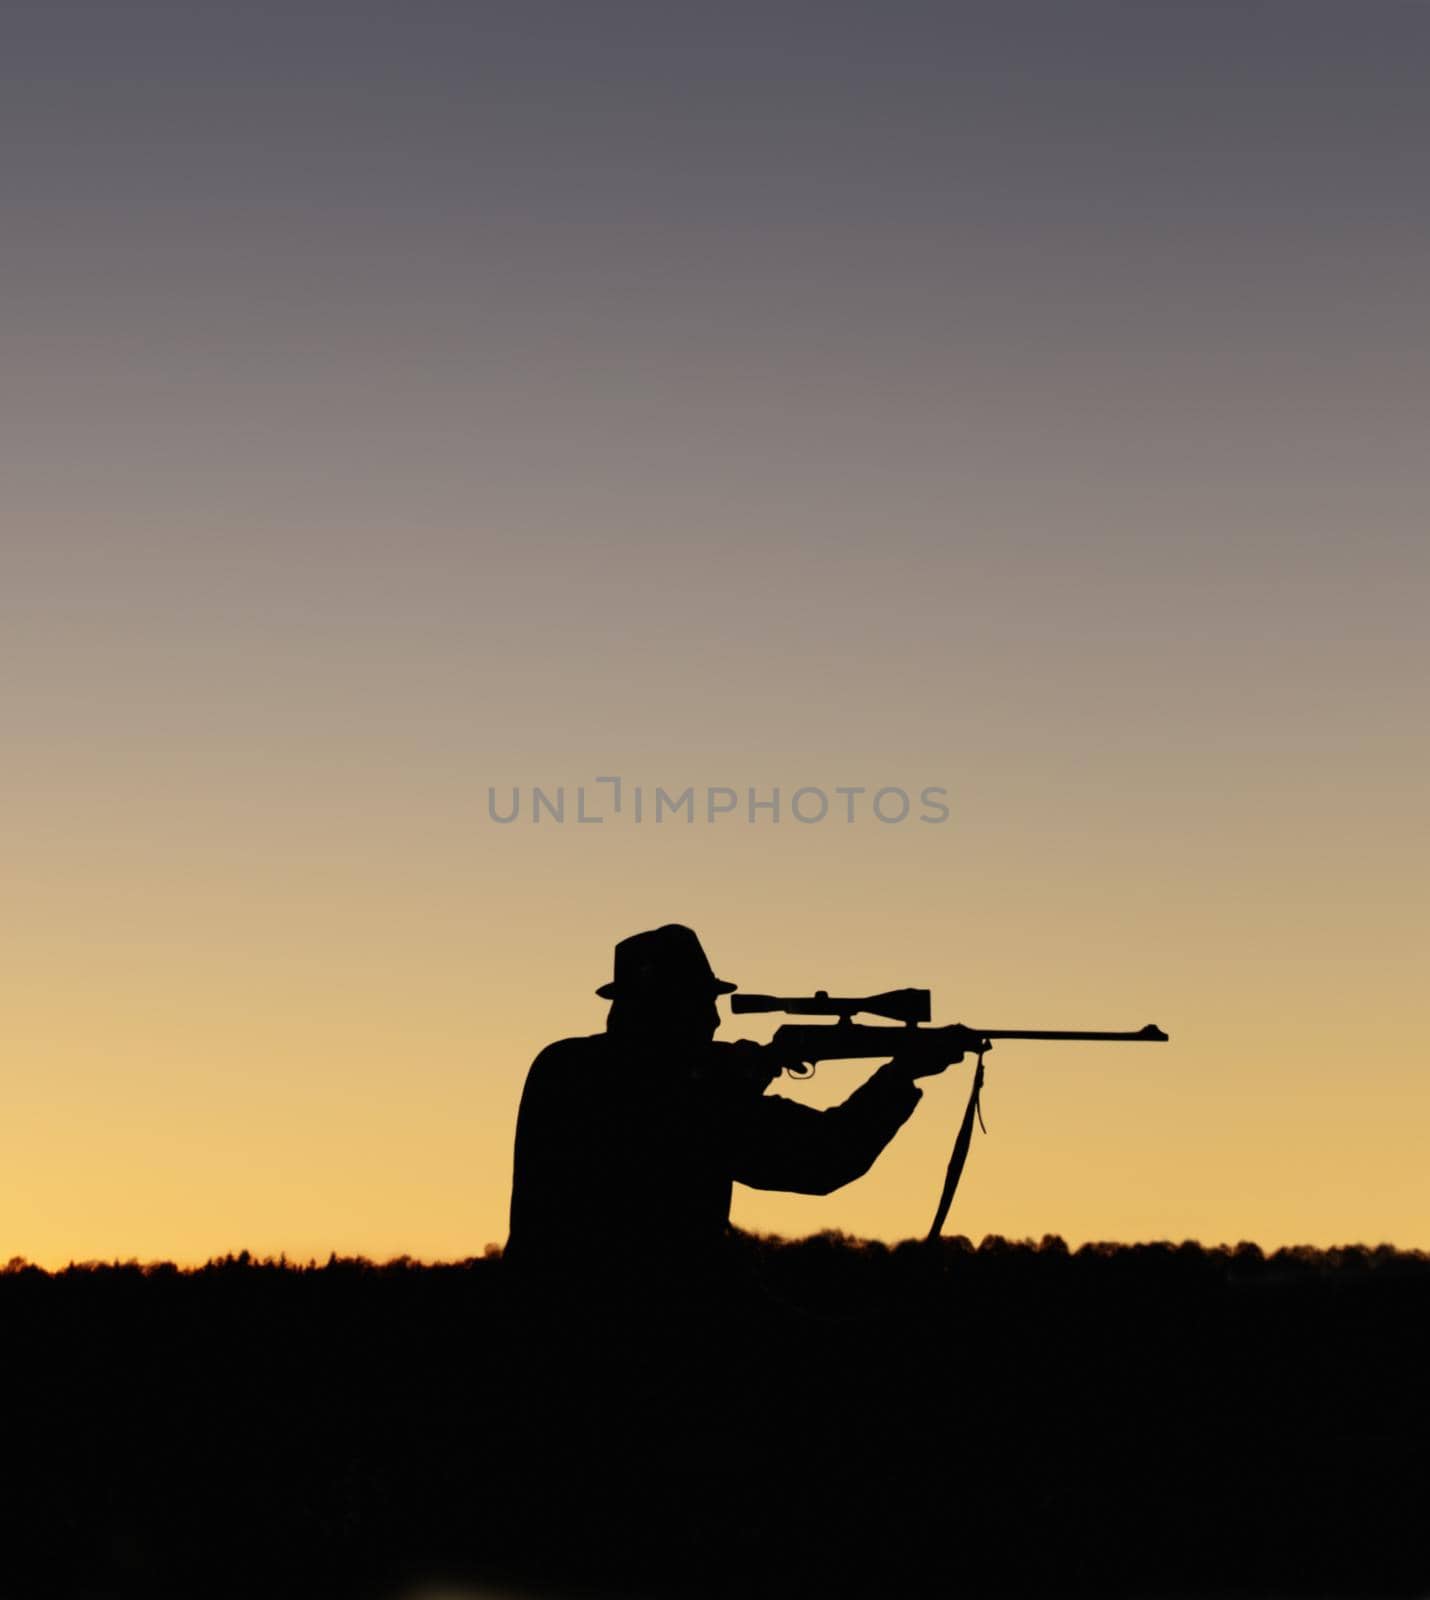 A silhouette of a man in the outdoors holding up his sniper rifle.